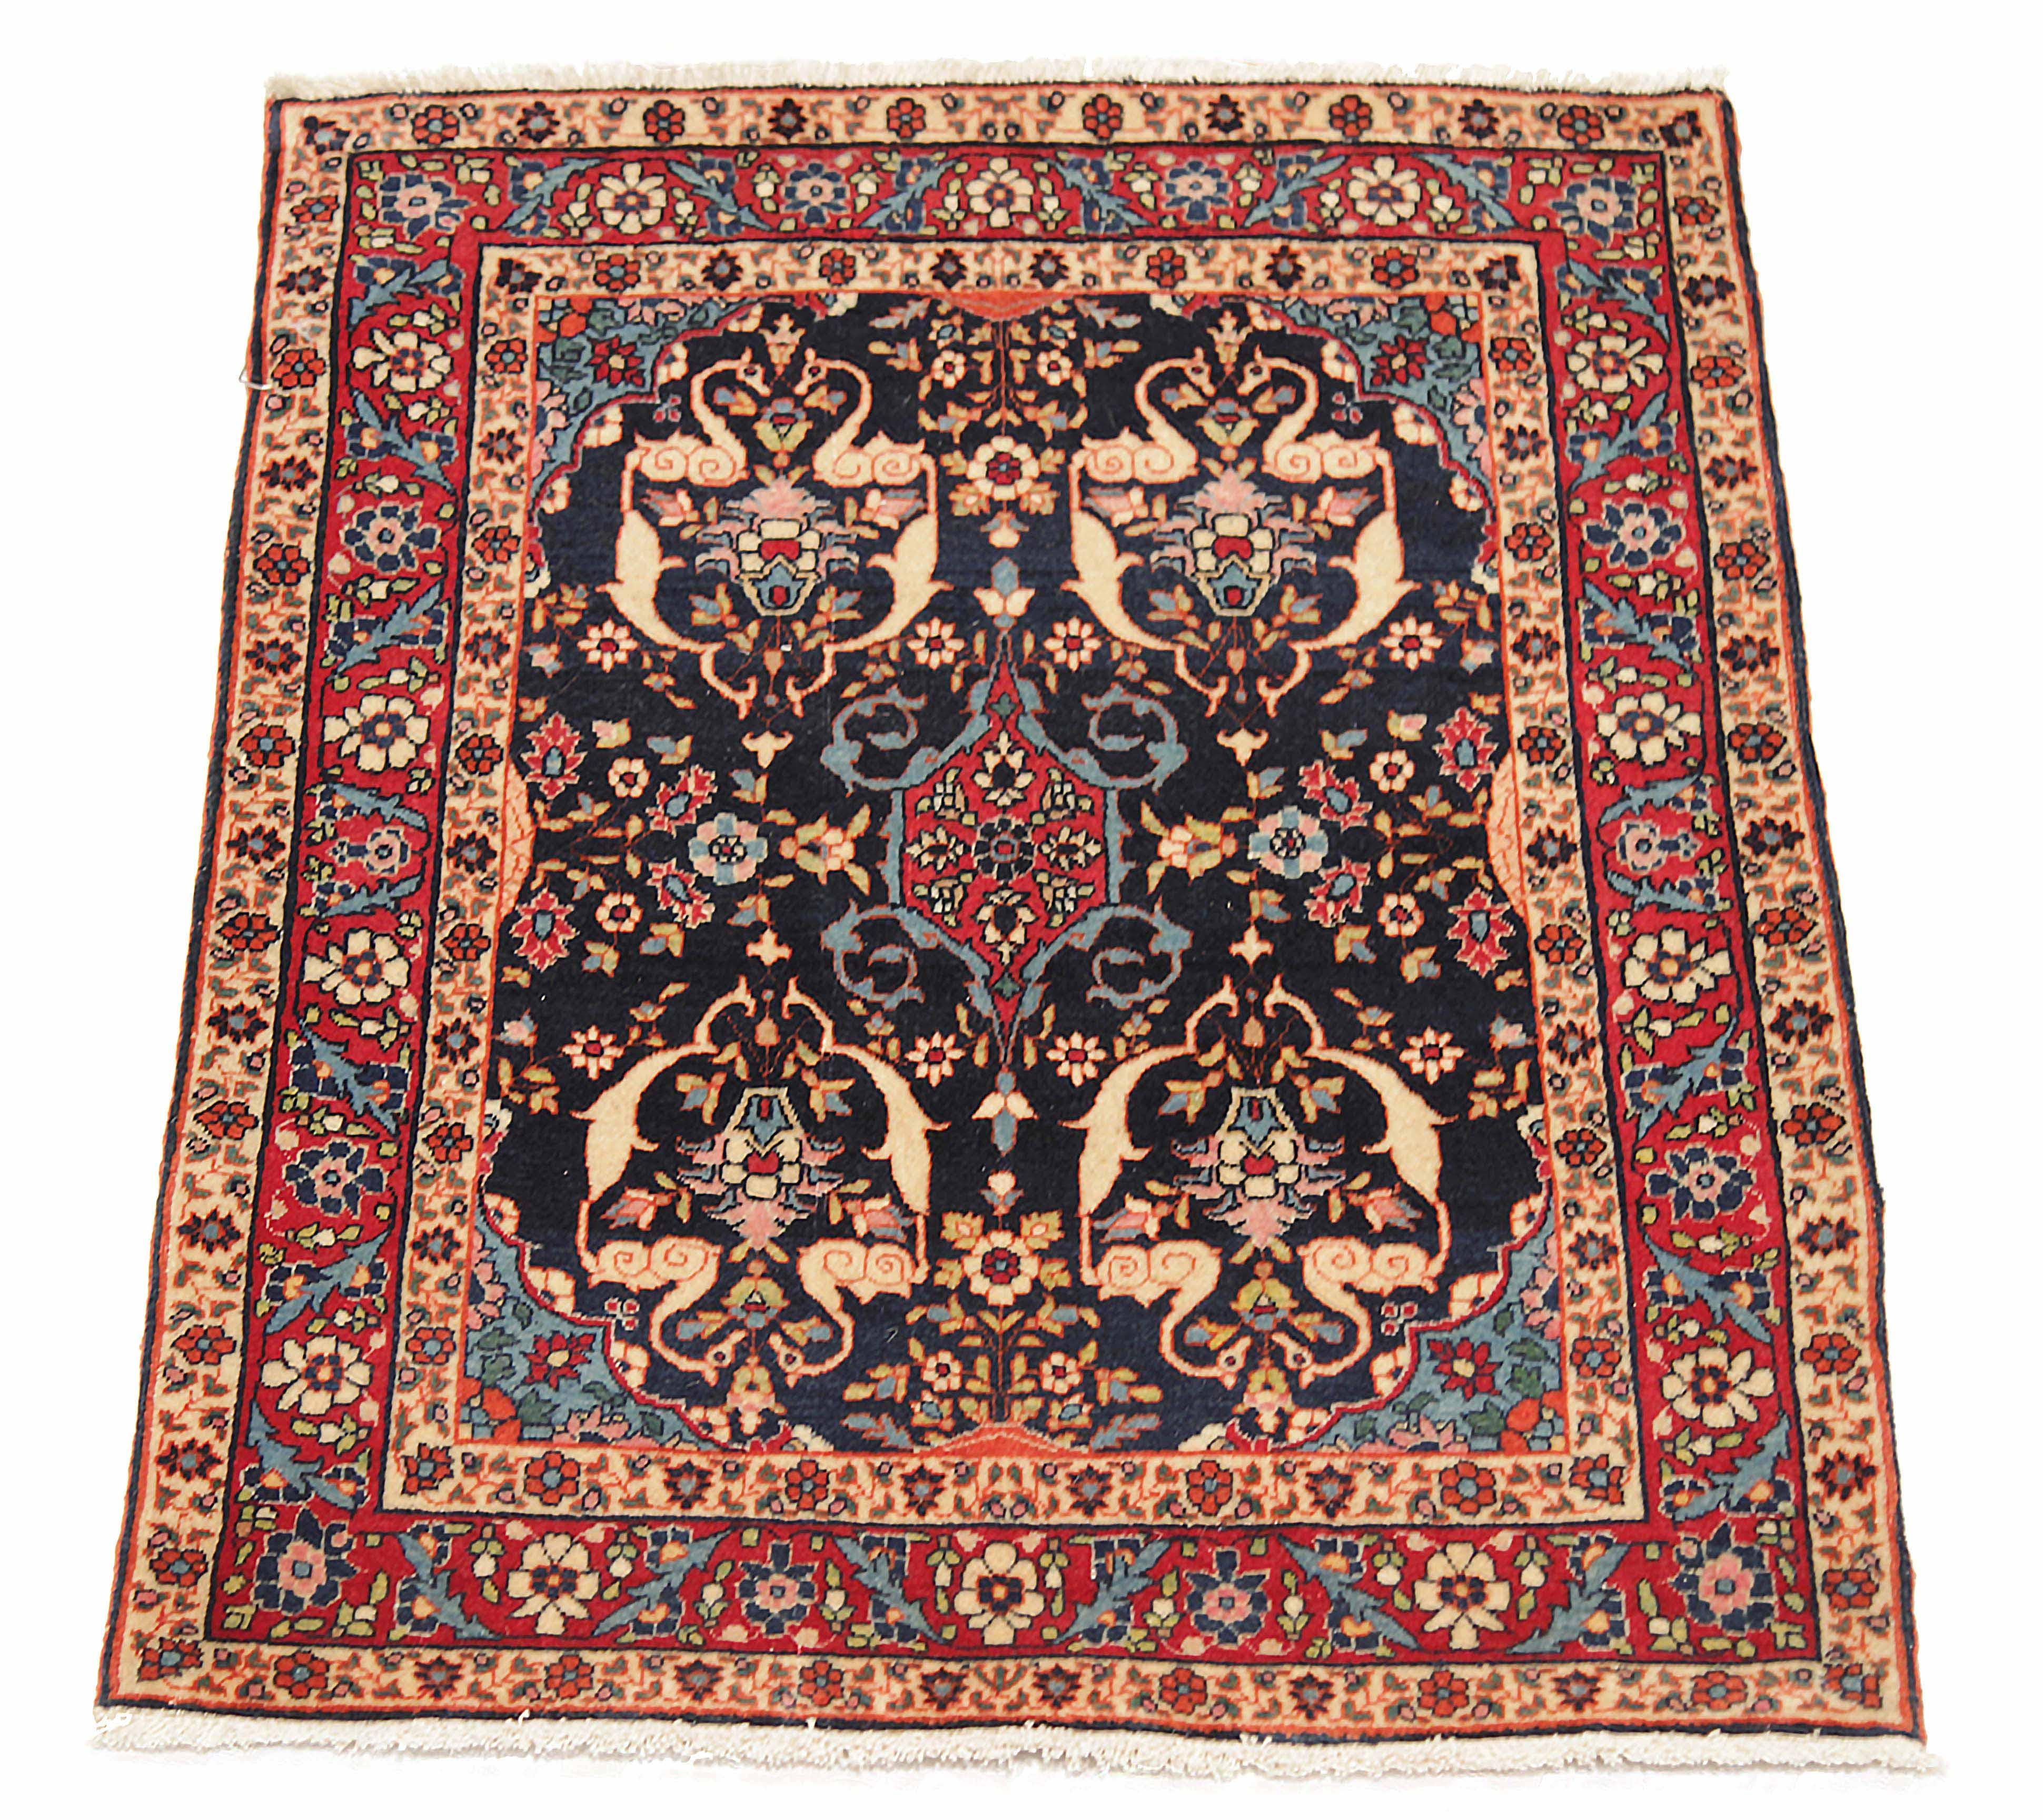 Antique Persian area rug handwoven from the finest sheep’s wool. It’s colored with all-natural vegetable dyes that are safe for humans and pets. It’s a traditional Tehran design handwoven by expert artisans. It’s a lovely area rug that can be